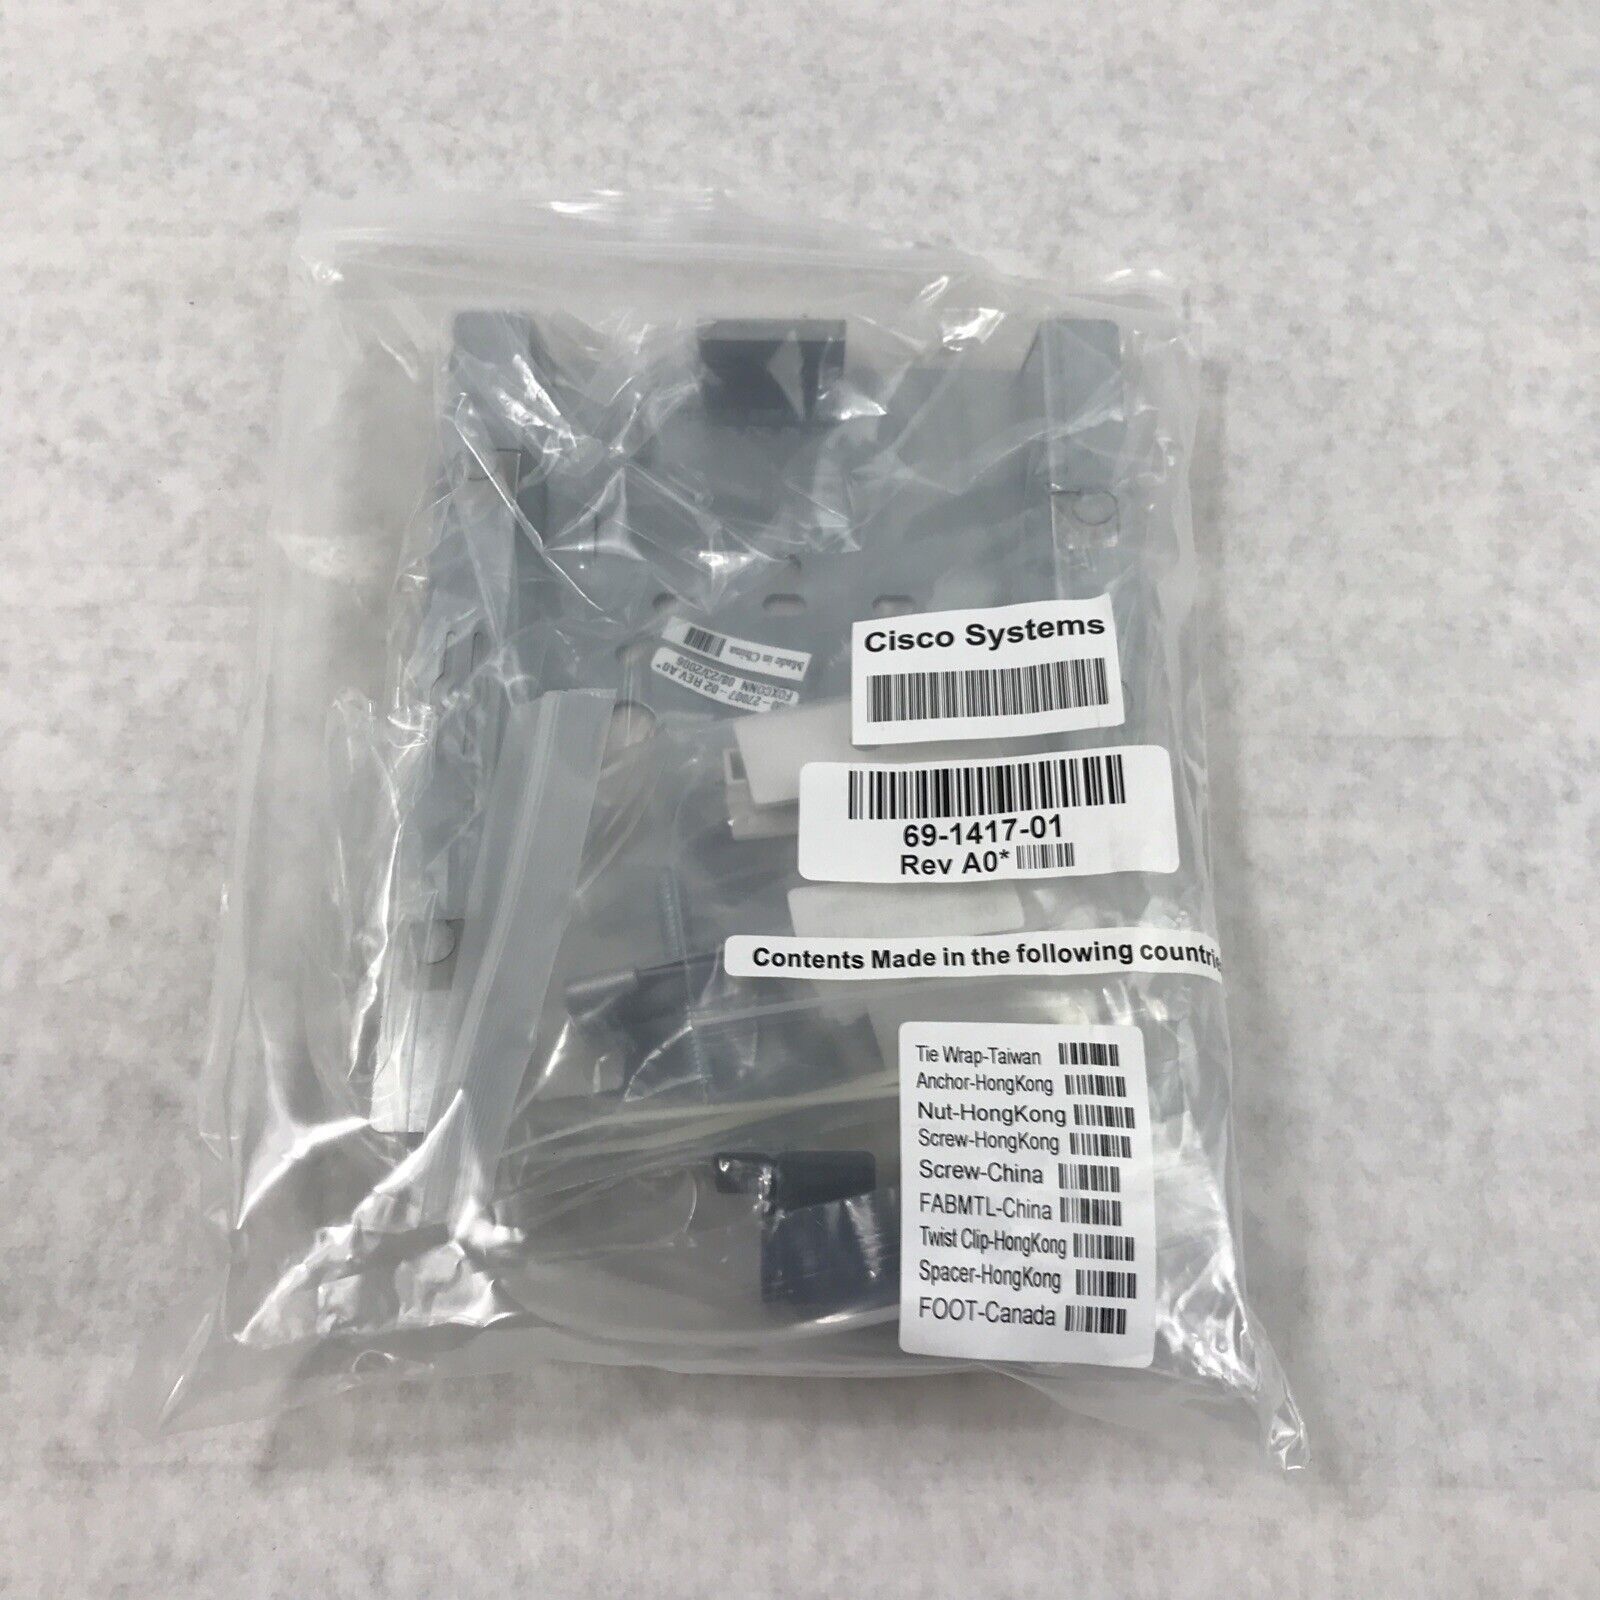 Cisco 69-1417-01 Aironet1240ag Mounting Hardware Complete